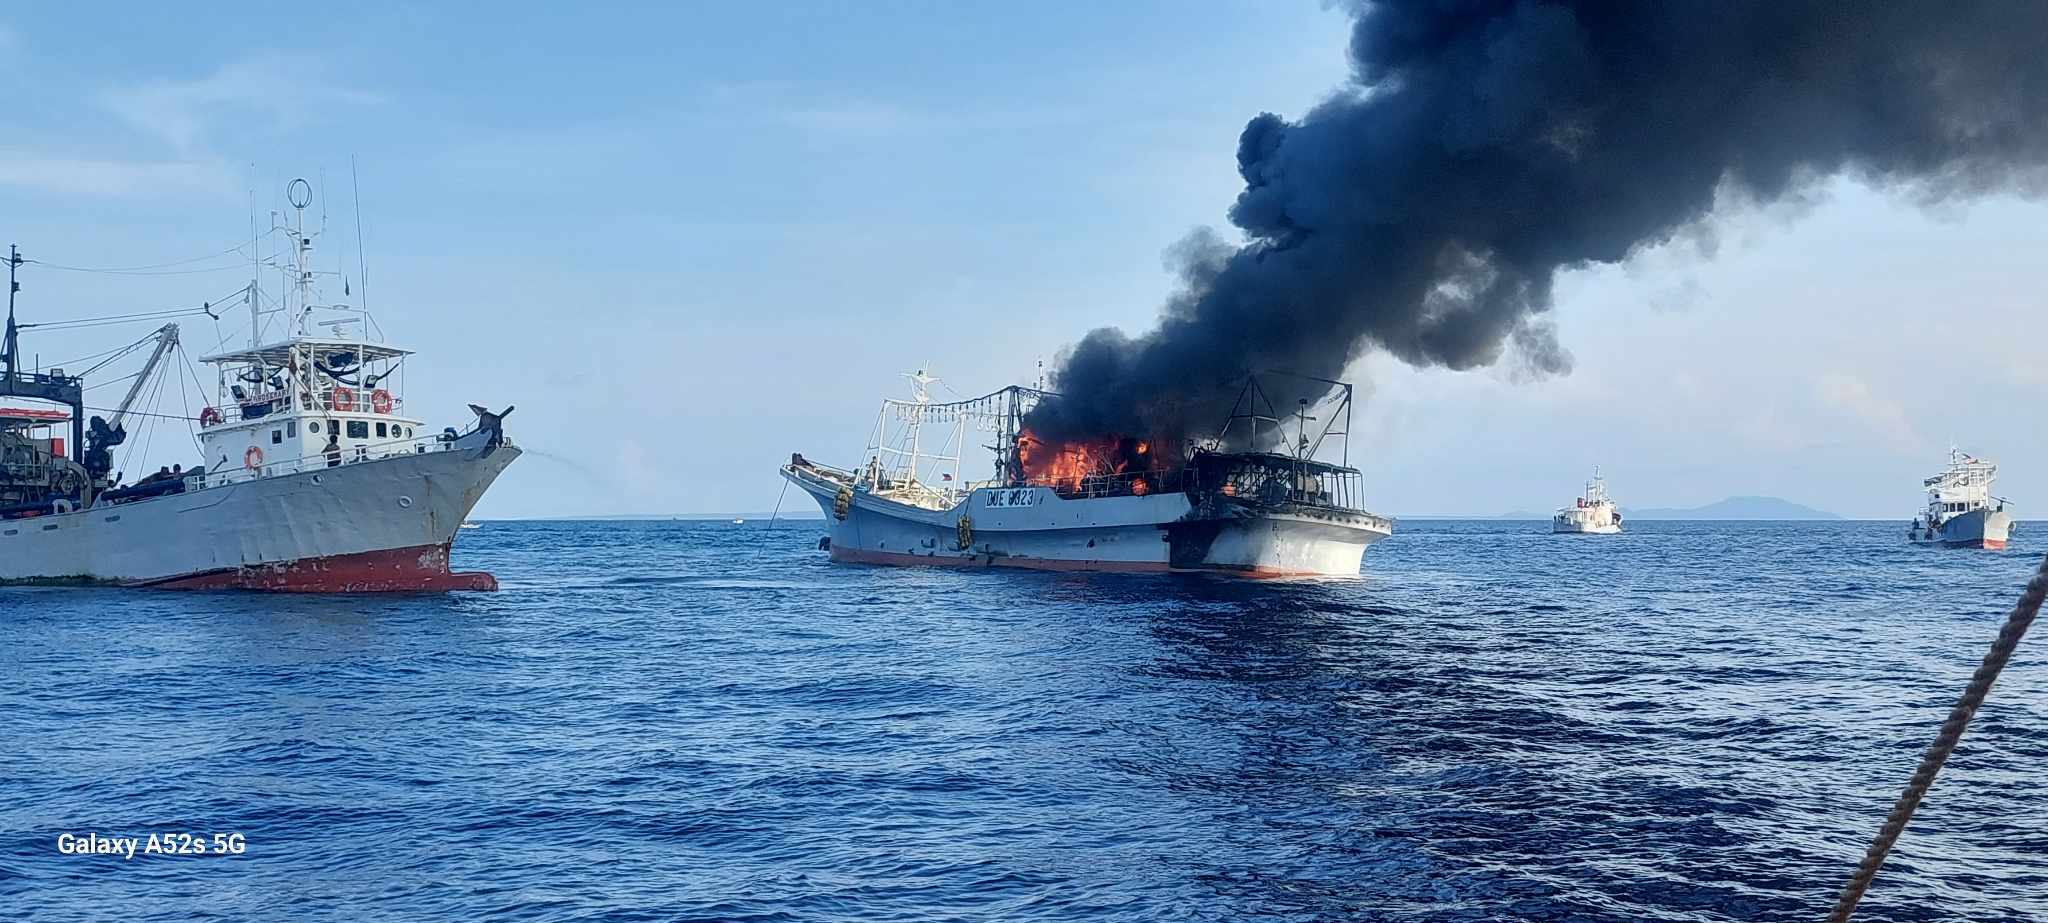 Two hurt after fishing vessel caught fire before sinking in Palawan